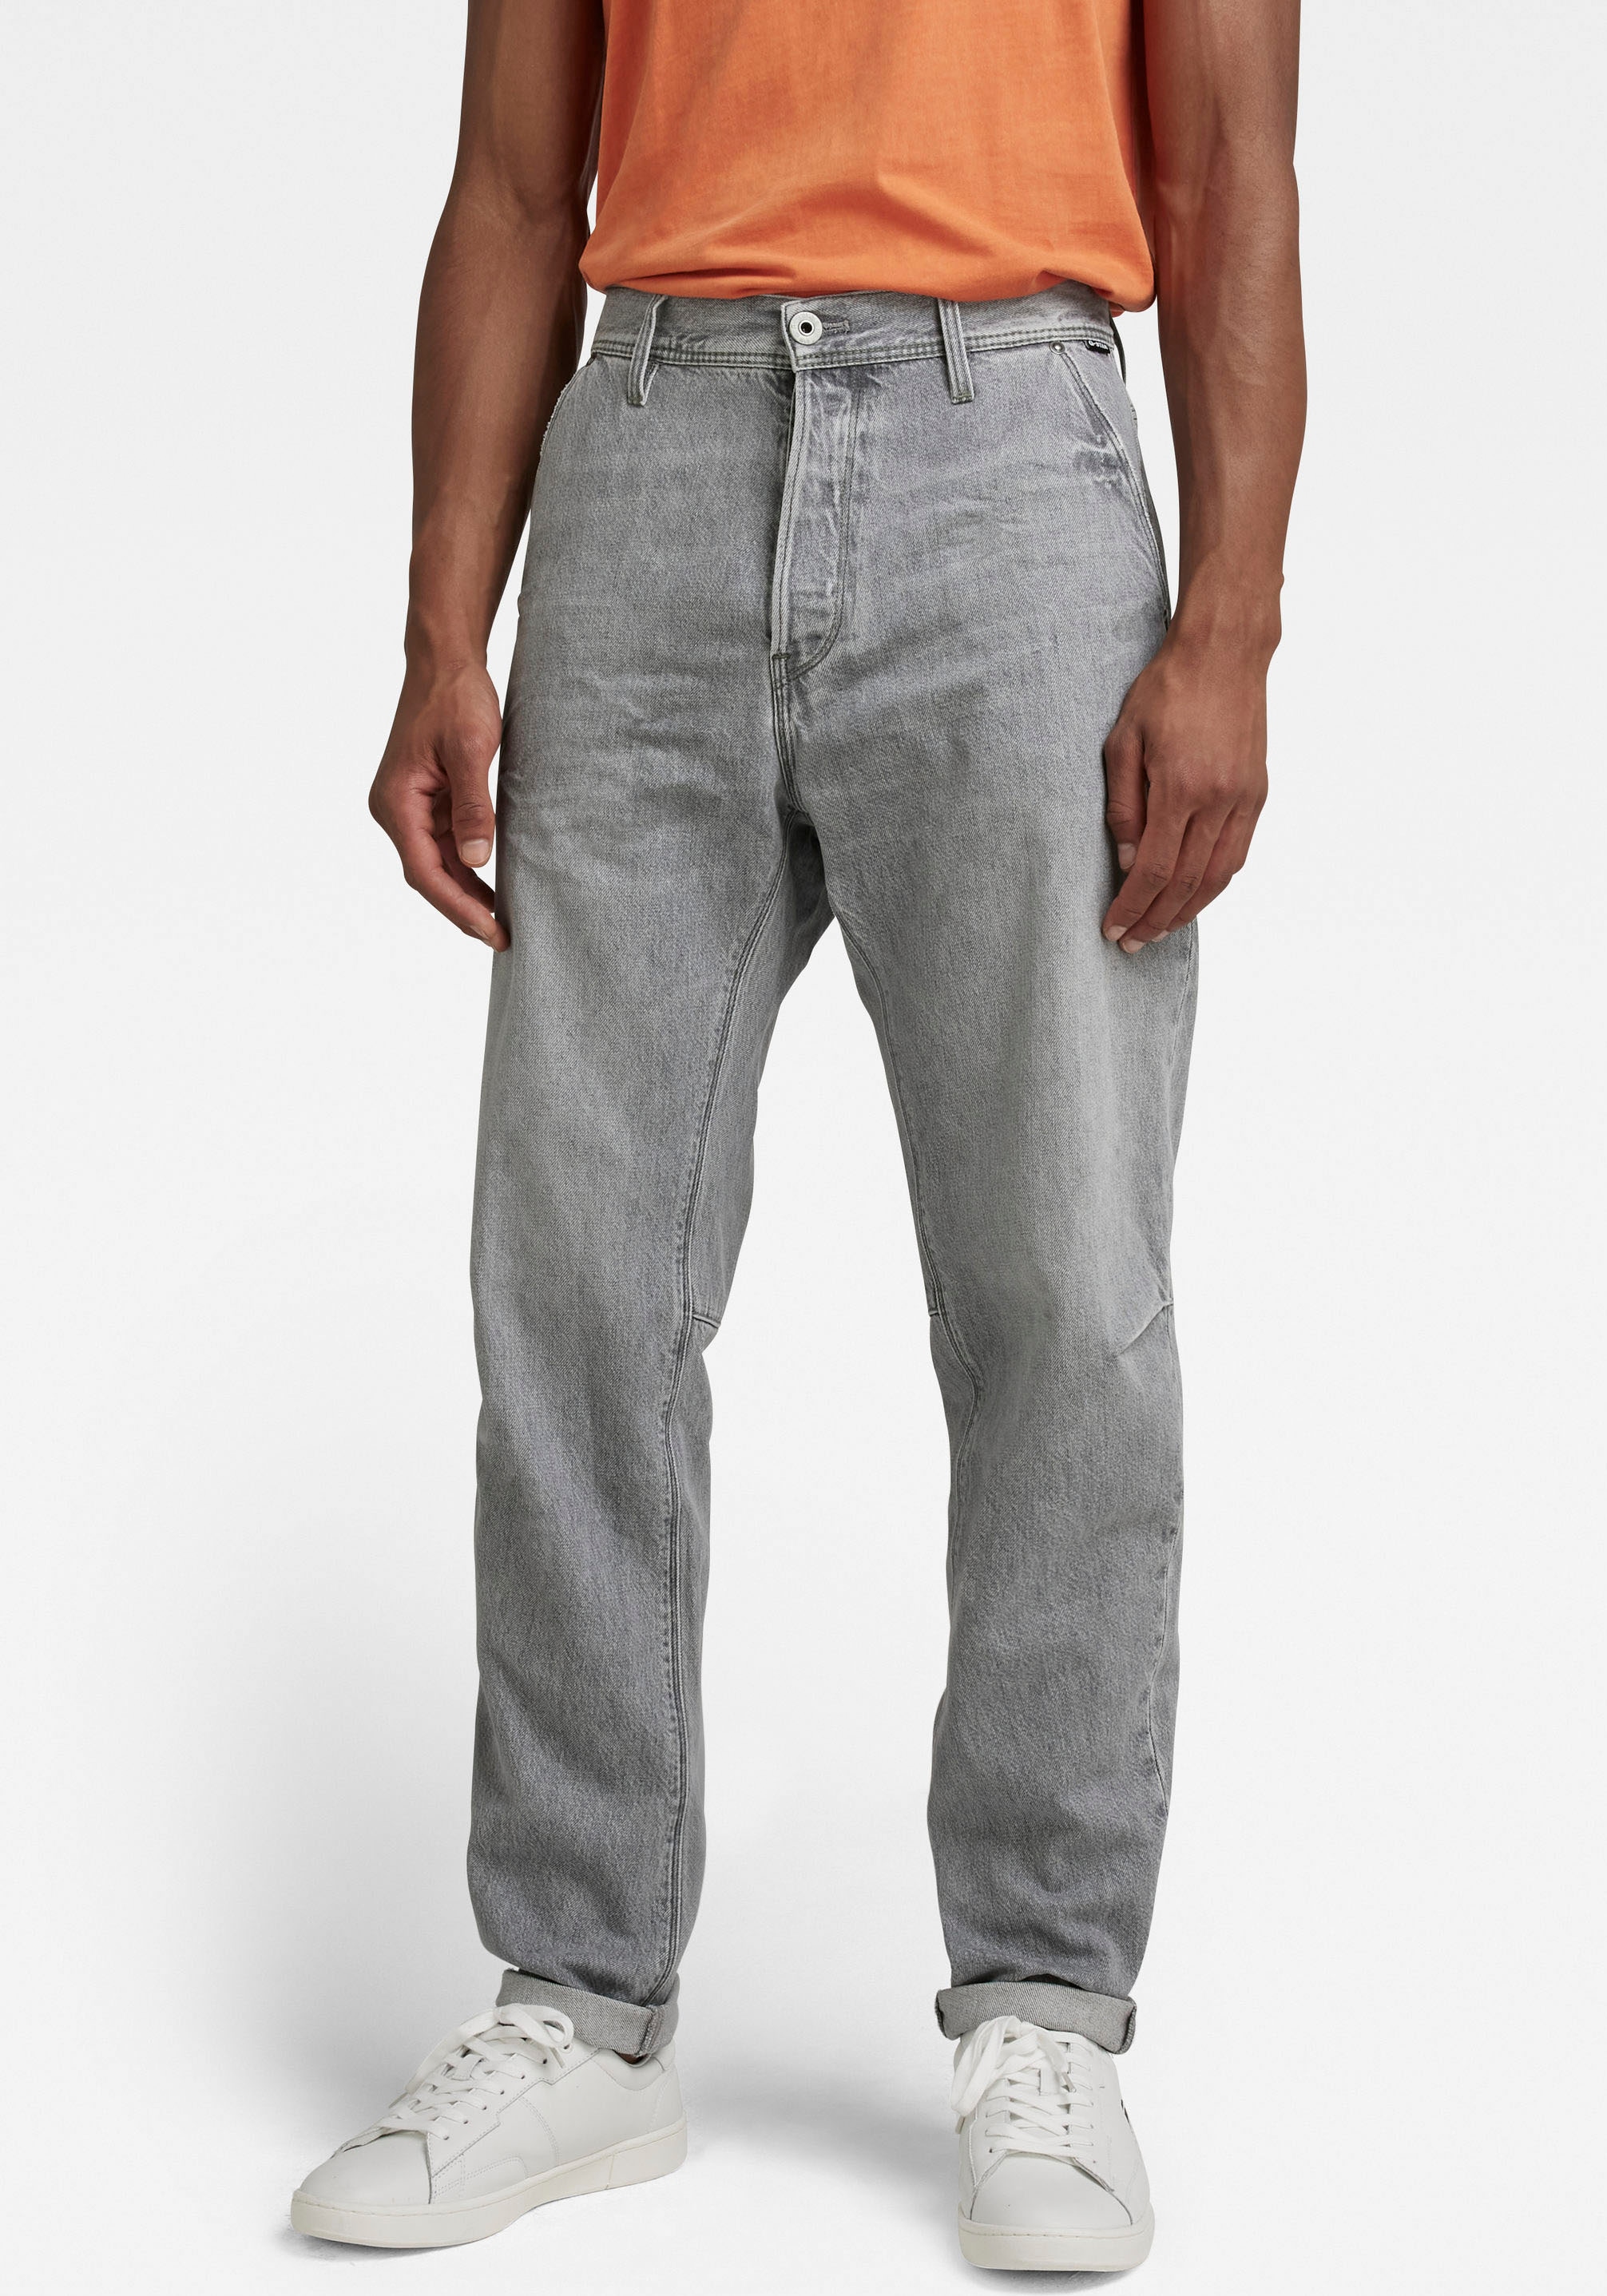 Tapered Tapered-fit-Jeans RAW Jelmoli-Versand shoppen G-Star Grip 3d« »Relaxed online |